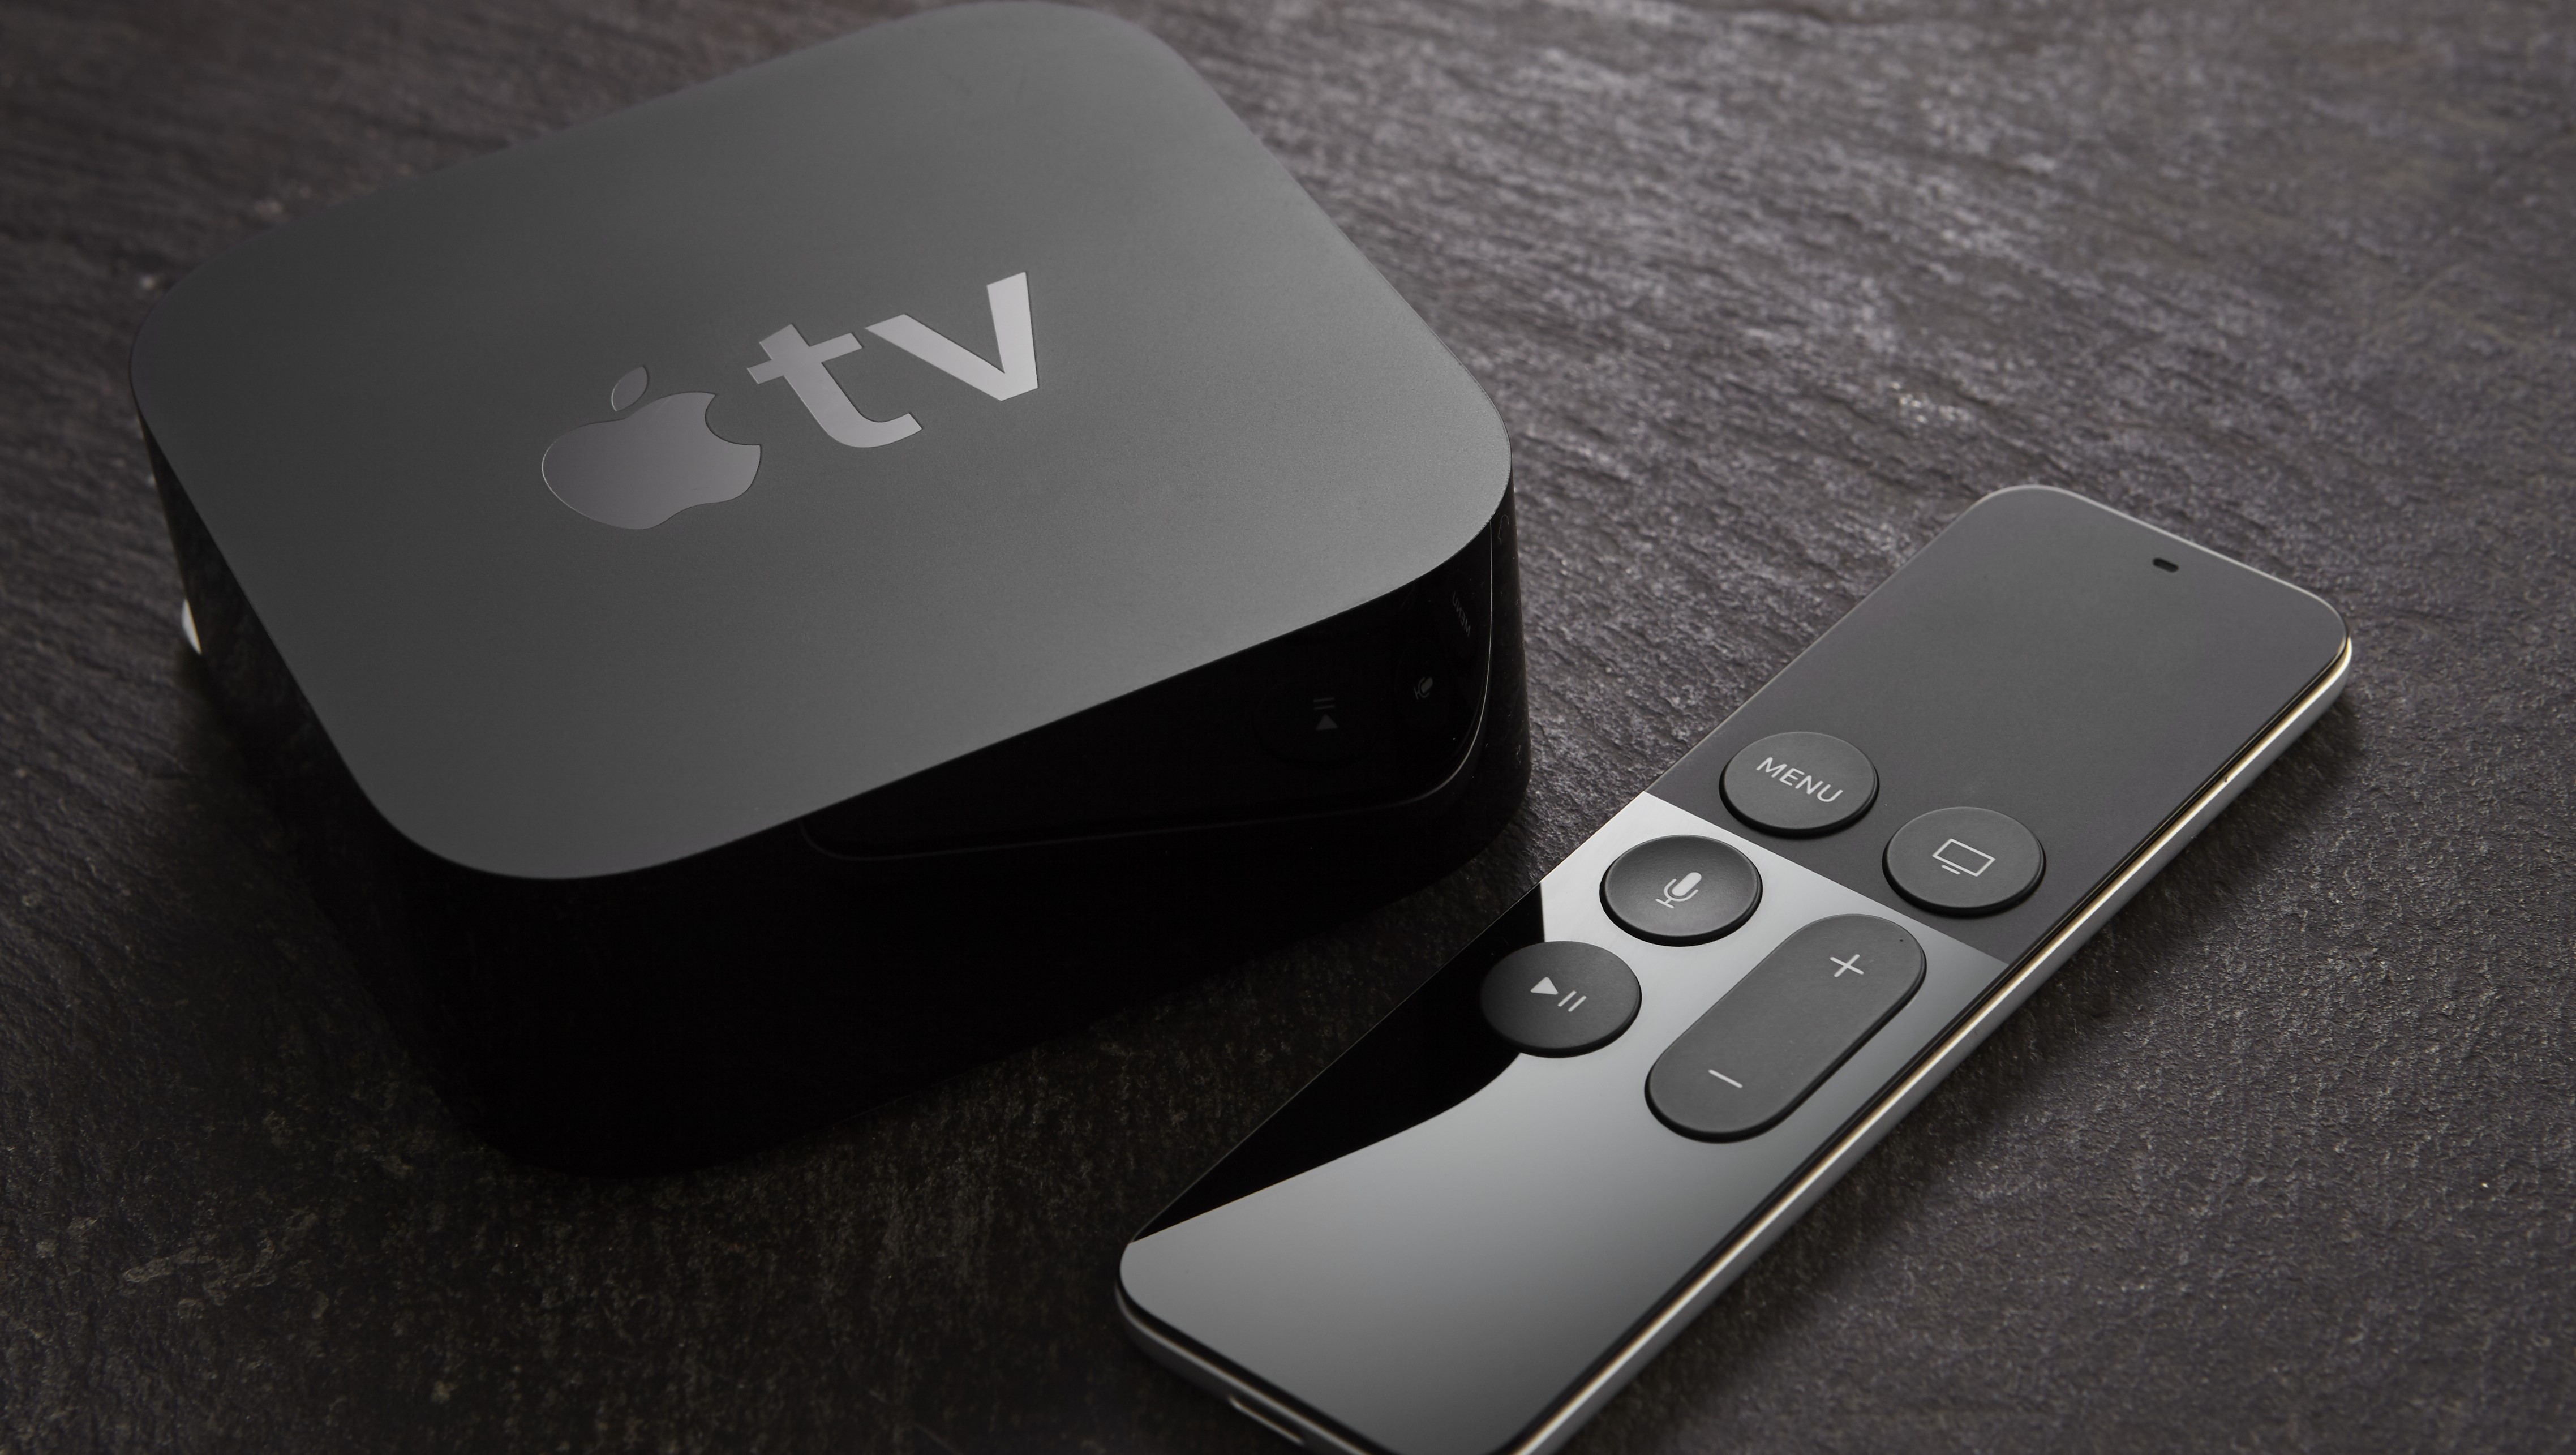 fusion fax trojansk hest Apple TV review: a brilliant streamer, but still missing some key apps | T3